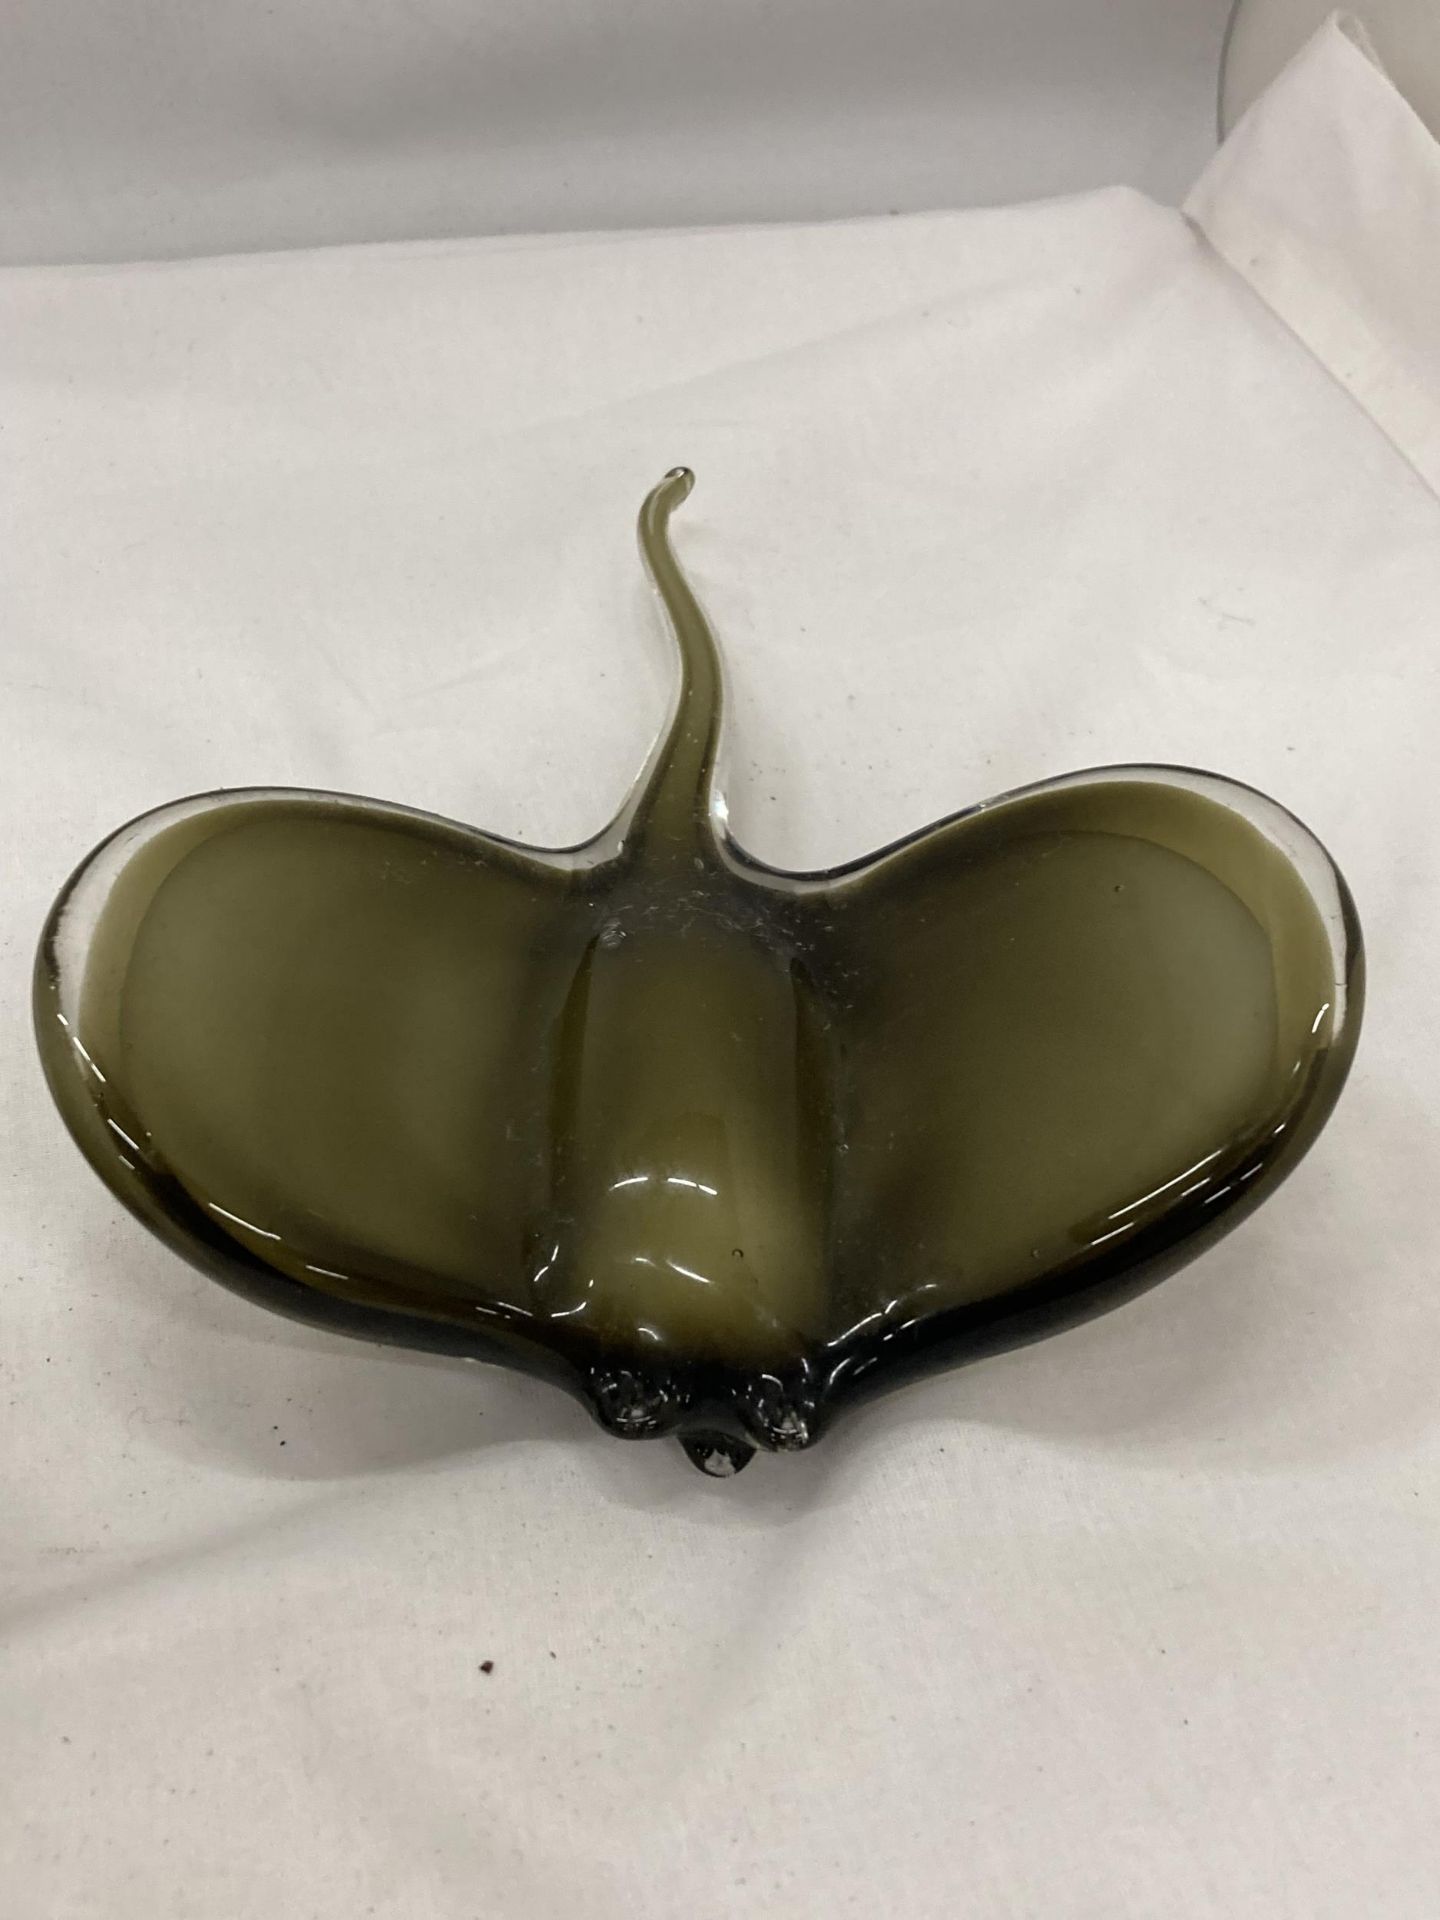 TWO PIECES OF ART GLASS TO INCLUDE A STINGRAY DESIGN EXAMPLE - Image 3 of 3